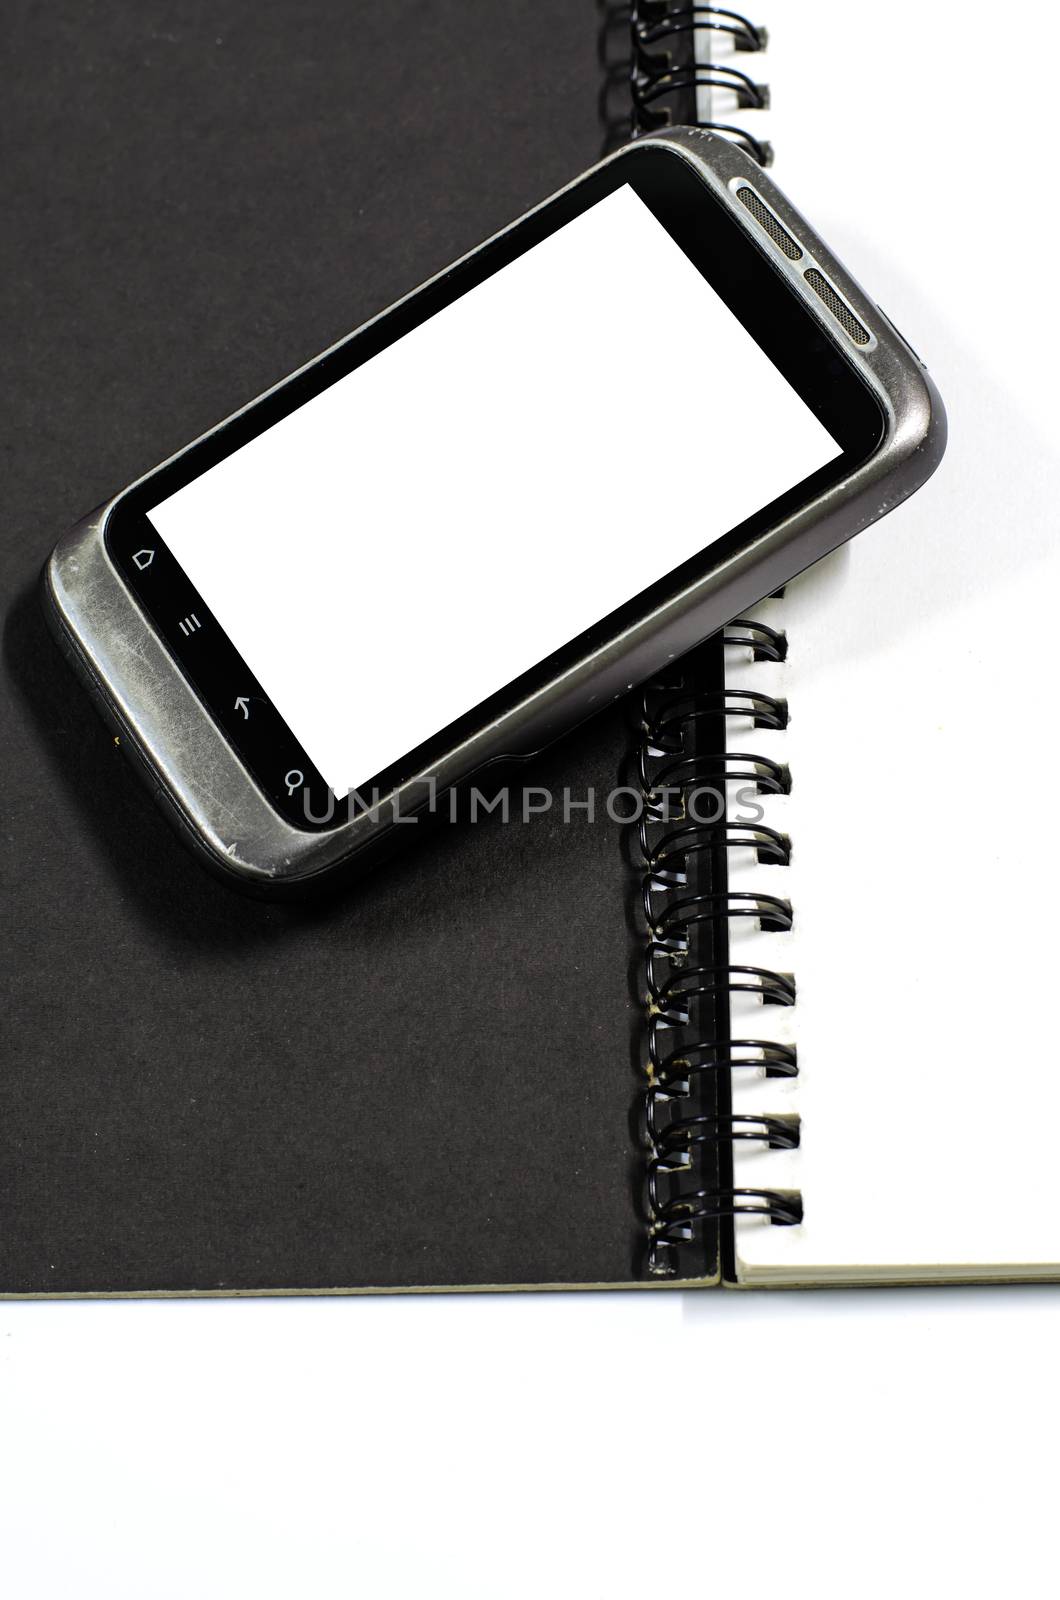 smartphone on note book by ammza12